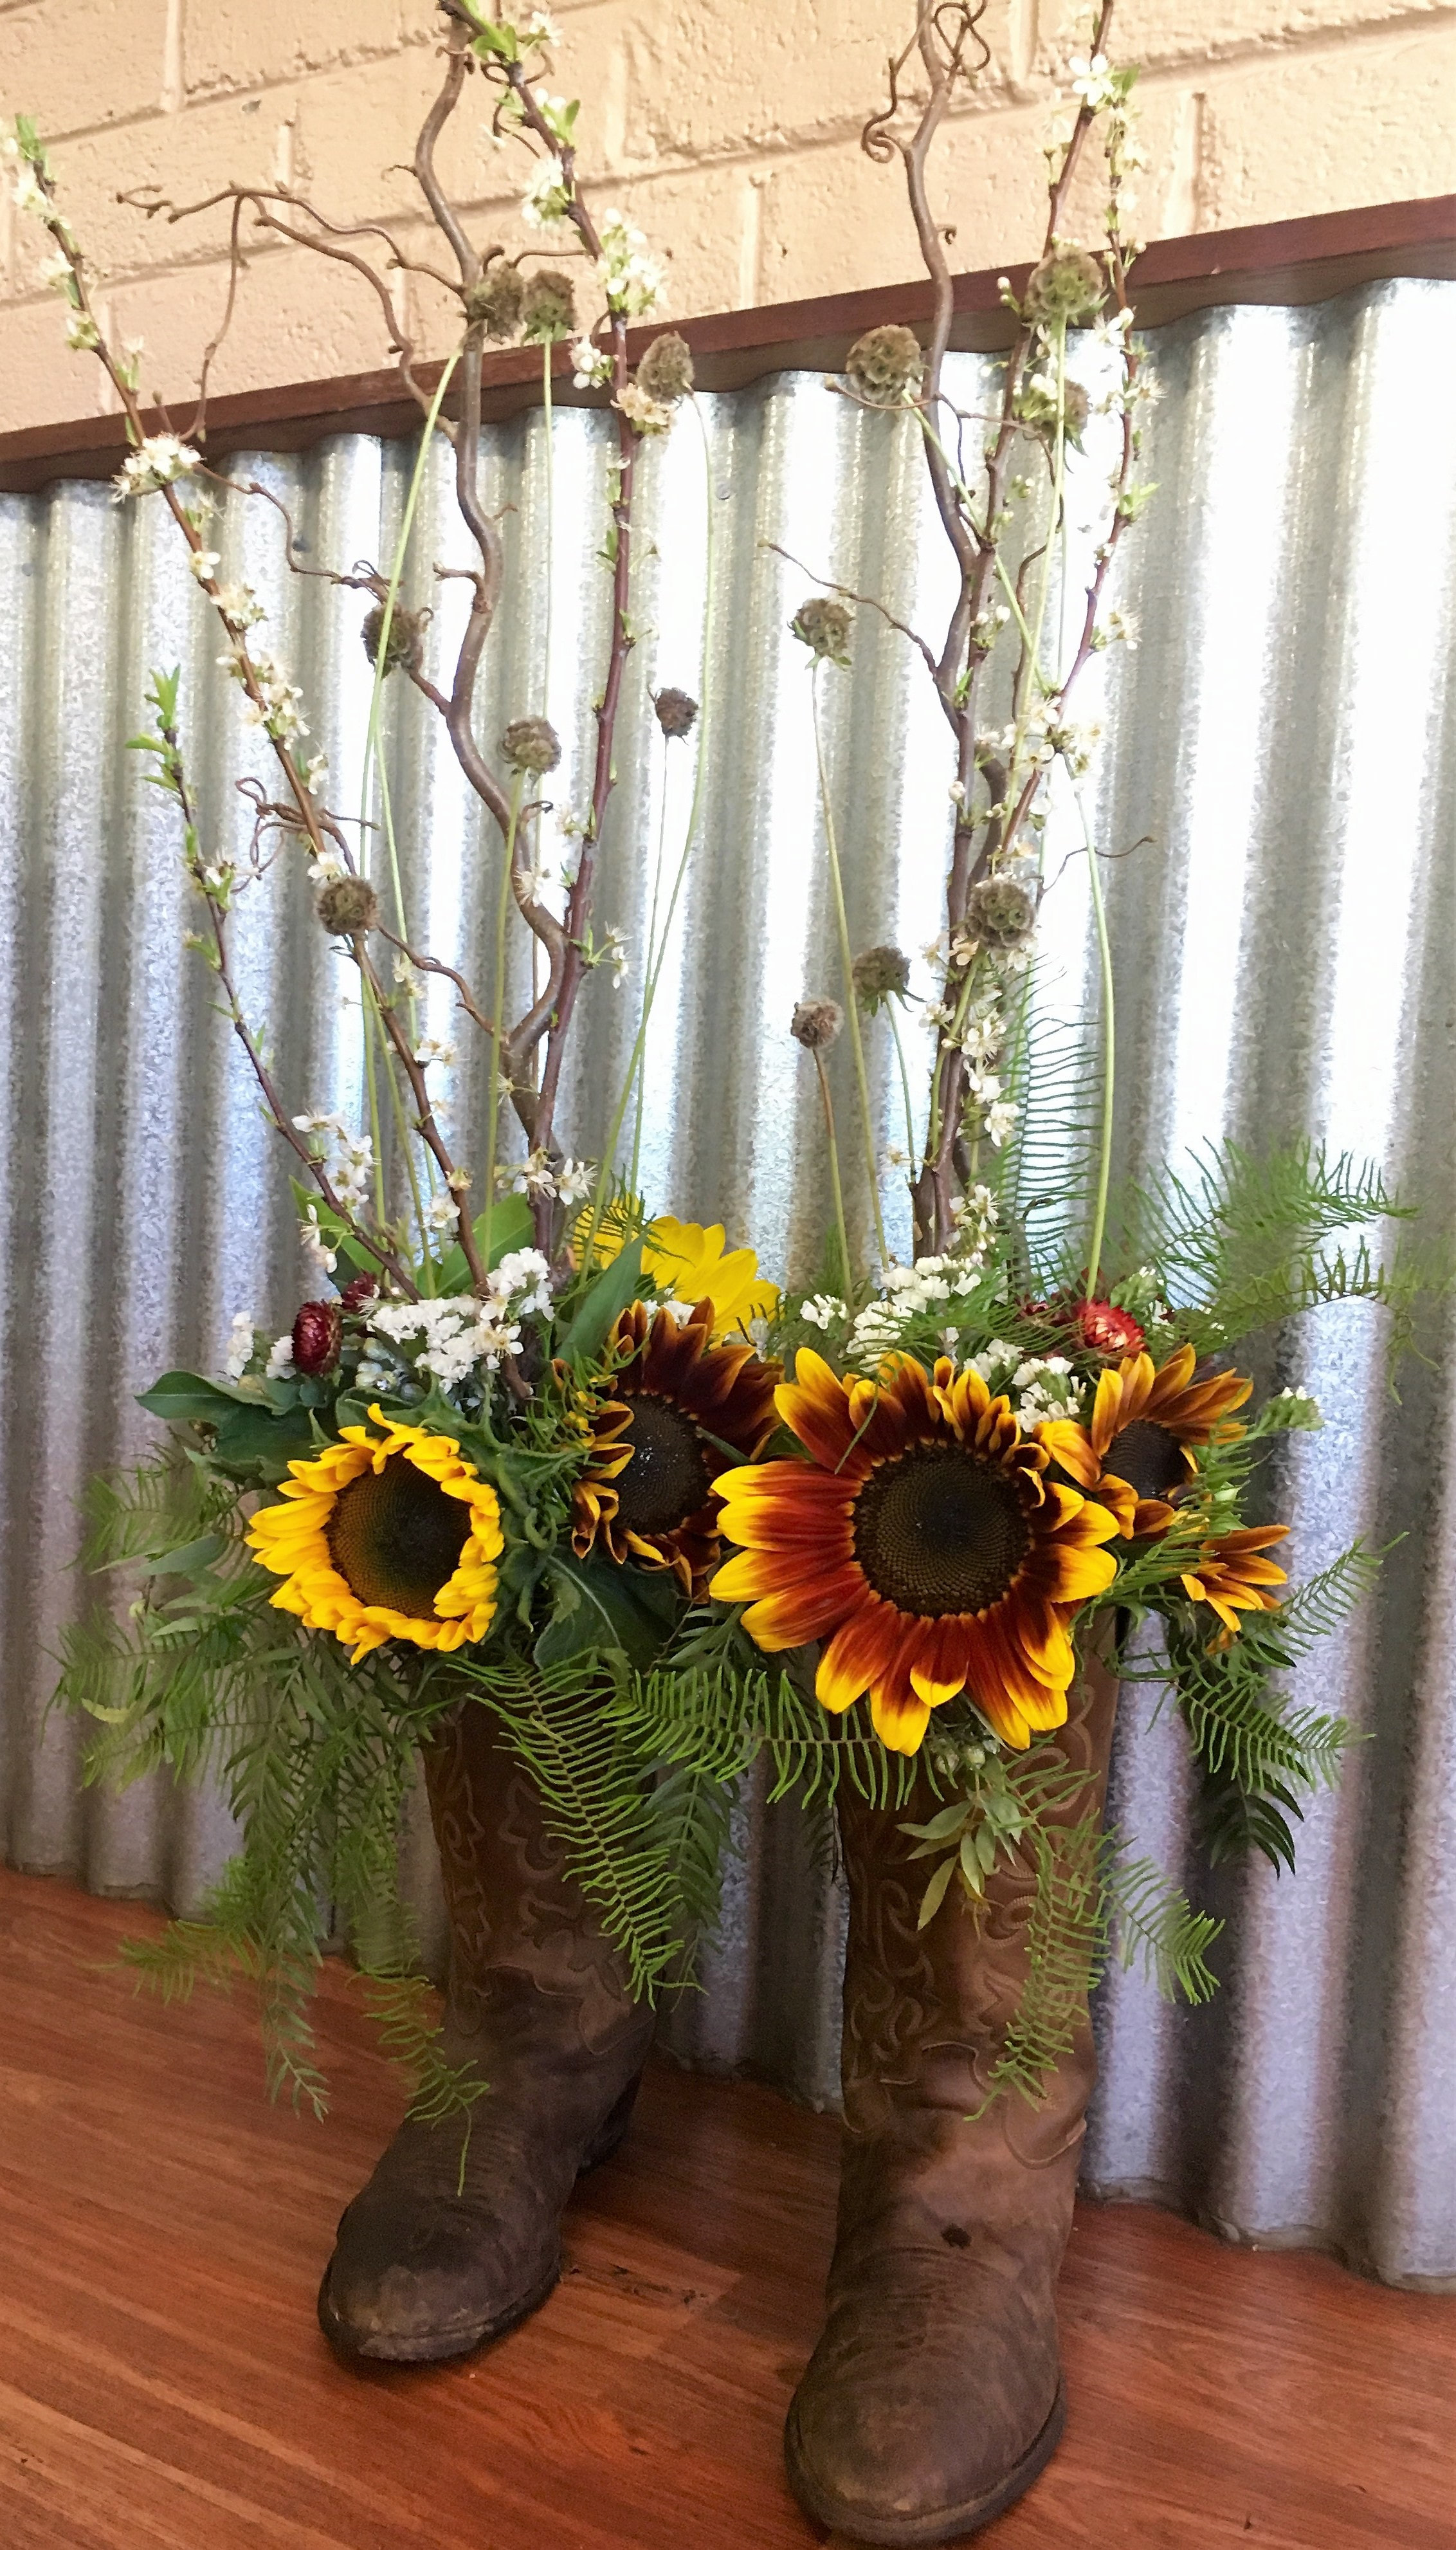 Floral arrangement in rustic style with native Australian flowers